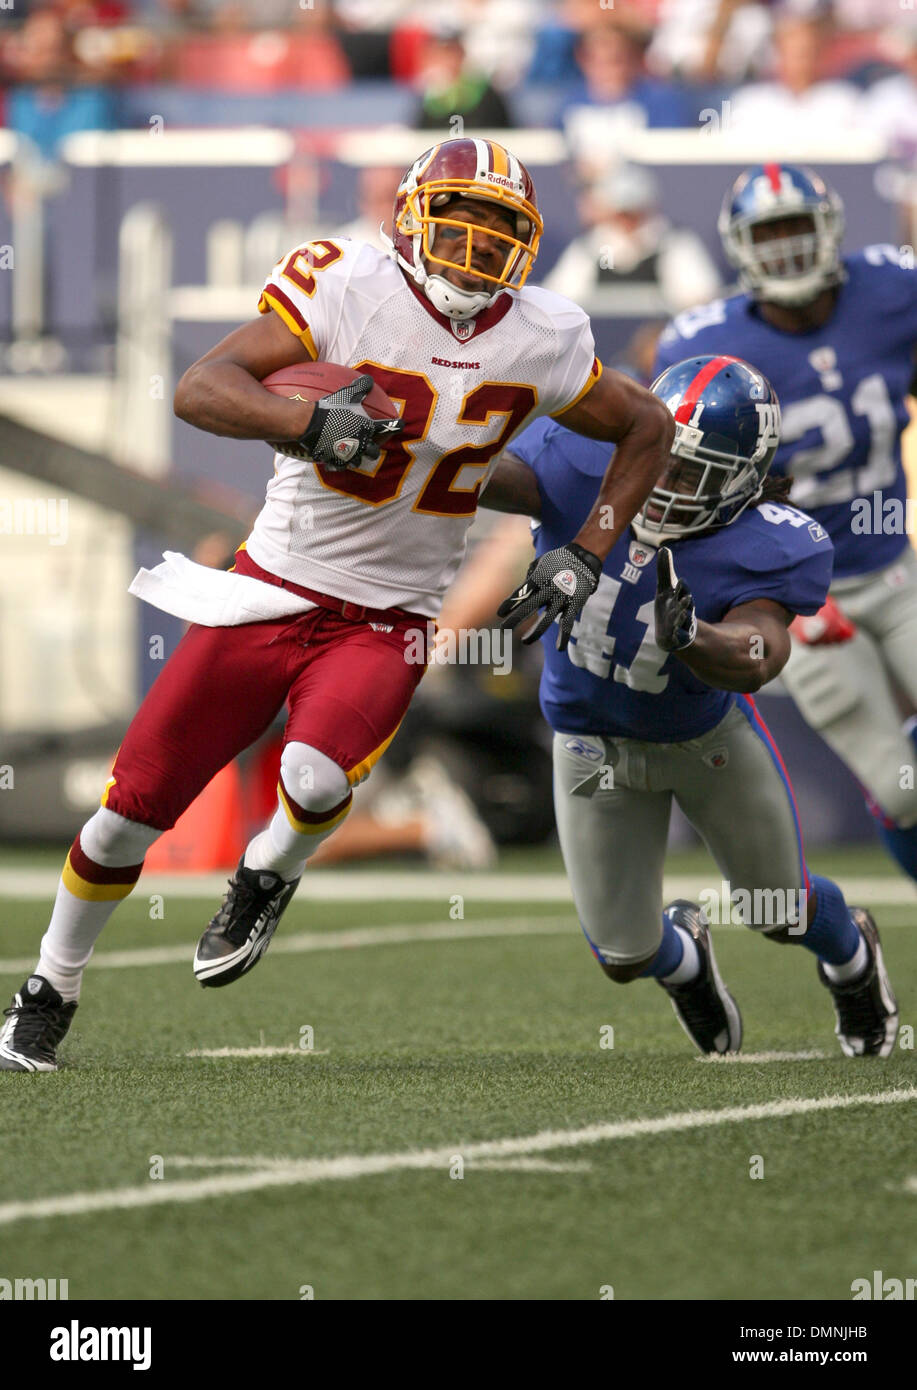 13 September 2009:Redskins #82 Antwan Randle El evades tackle.    The New York Giants defeated the Washington Redskins 23-17 at Giants Stadium in Rutherford, New Jersey. (Credit Image: © Southcreek Global/ZUMApress.com) Stock Photo